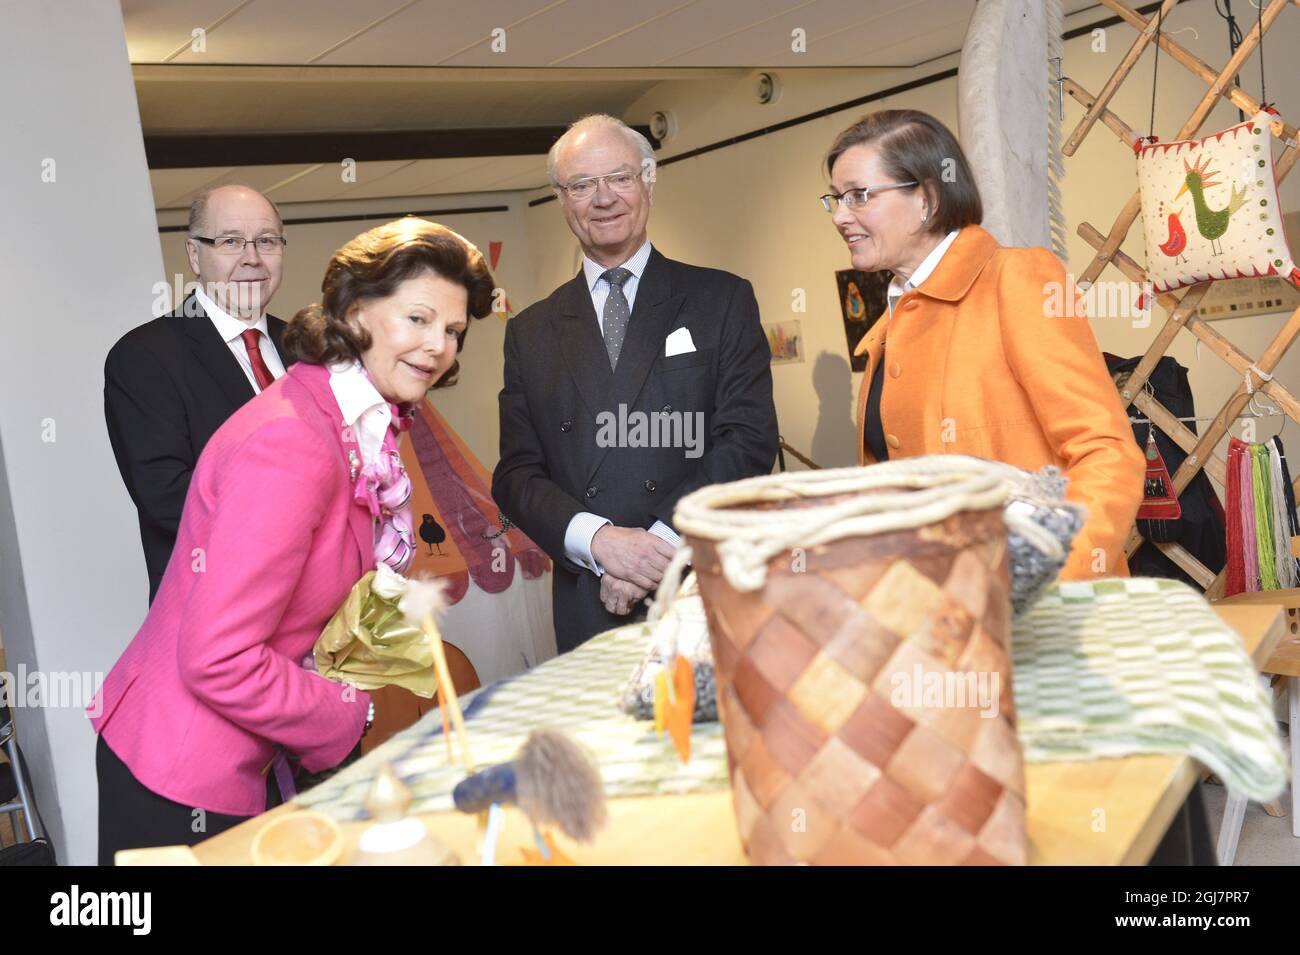 NYBRO 2013-03-06 Queen Silva and King Carl Gustaf of Sweden are guided by consultant Agneta Gefors during a handicraft exhibition in Nybro, Sweden March 6, 2013. The Royal couple is visiting the city in connection of the MonarchÂ´s 40th anniversary on the throne. Foto: Jonas EkstrÃ¶mer / SCANPIX / Kod 10030 Stock Photo